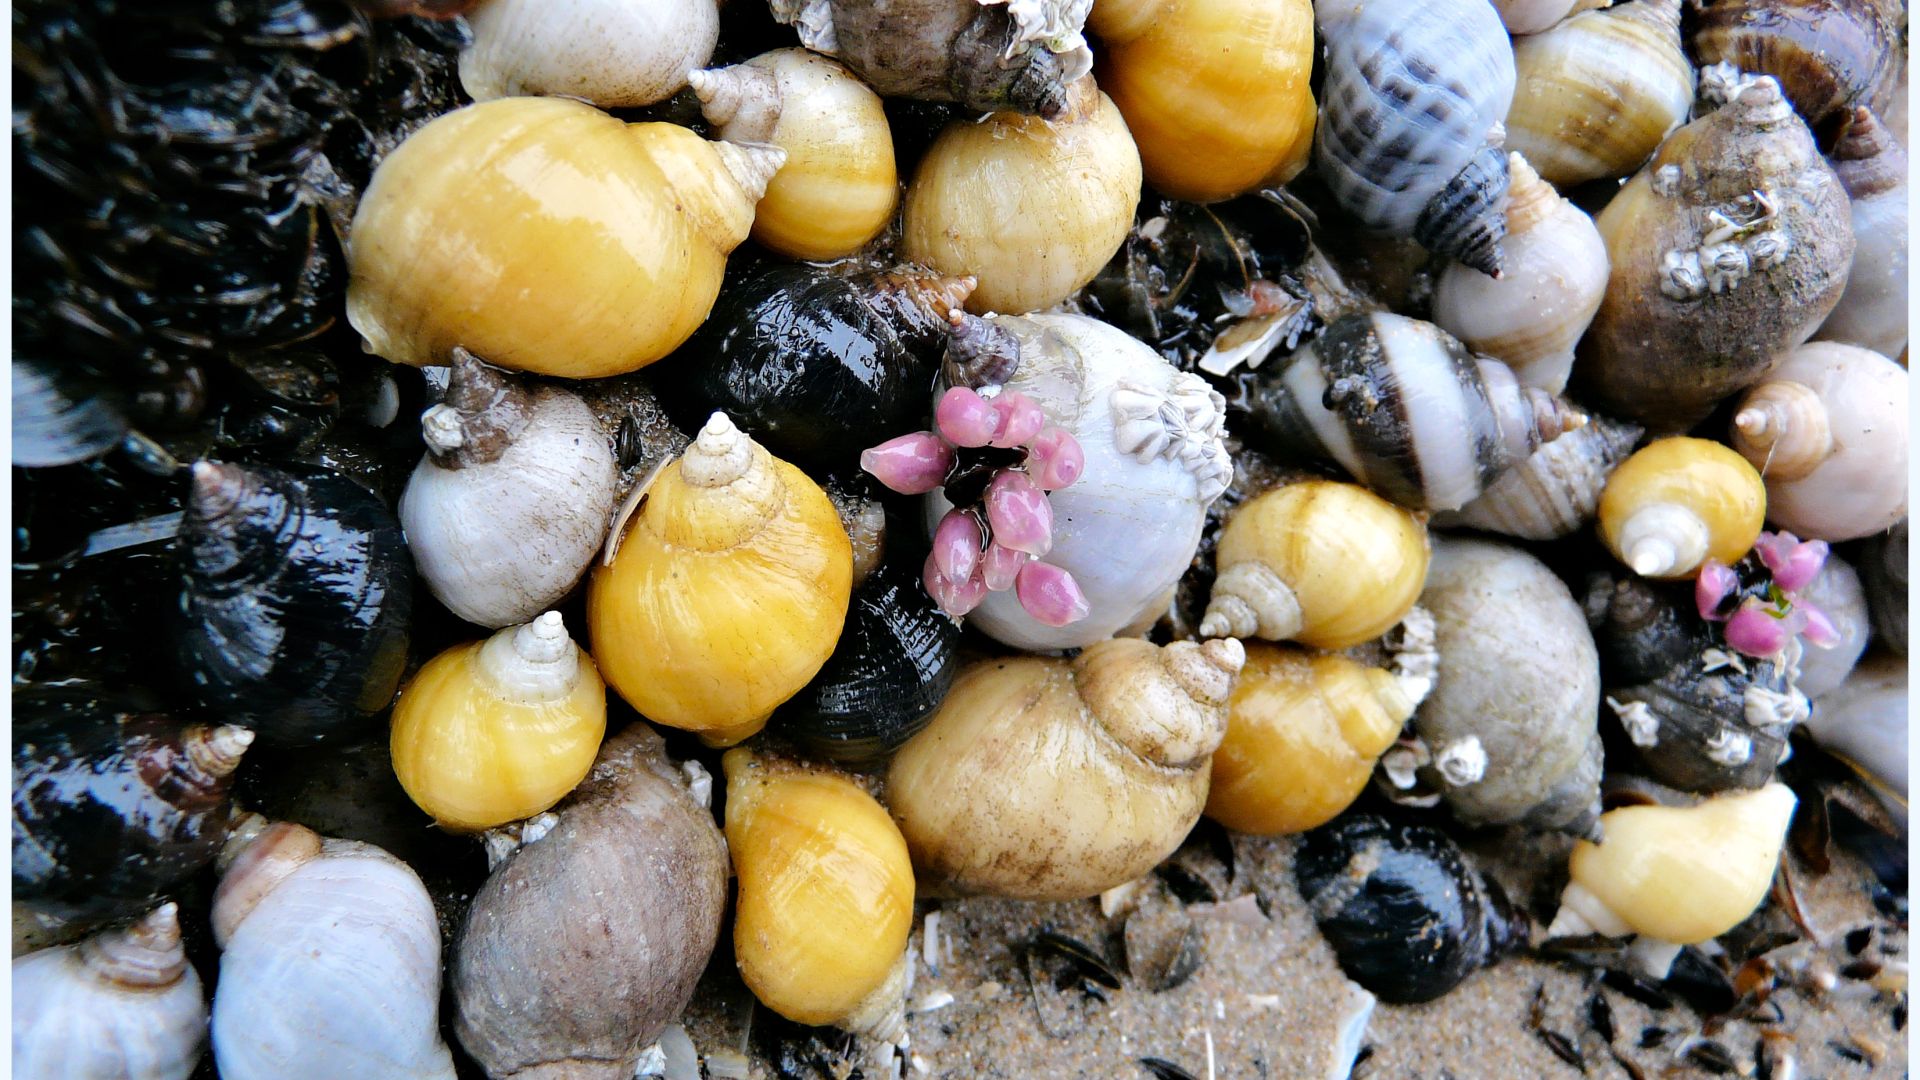 Mostly dog whelks feeding on barnacles and baby mussels attached to rocks